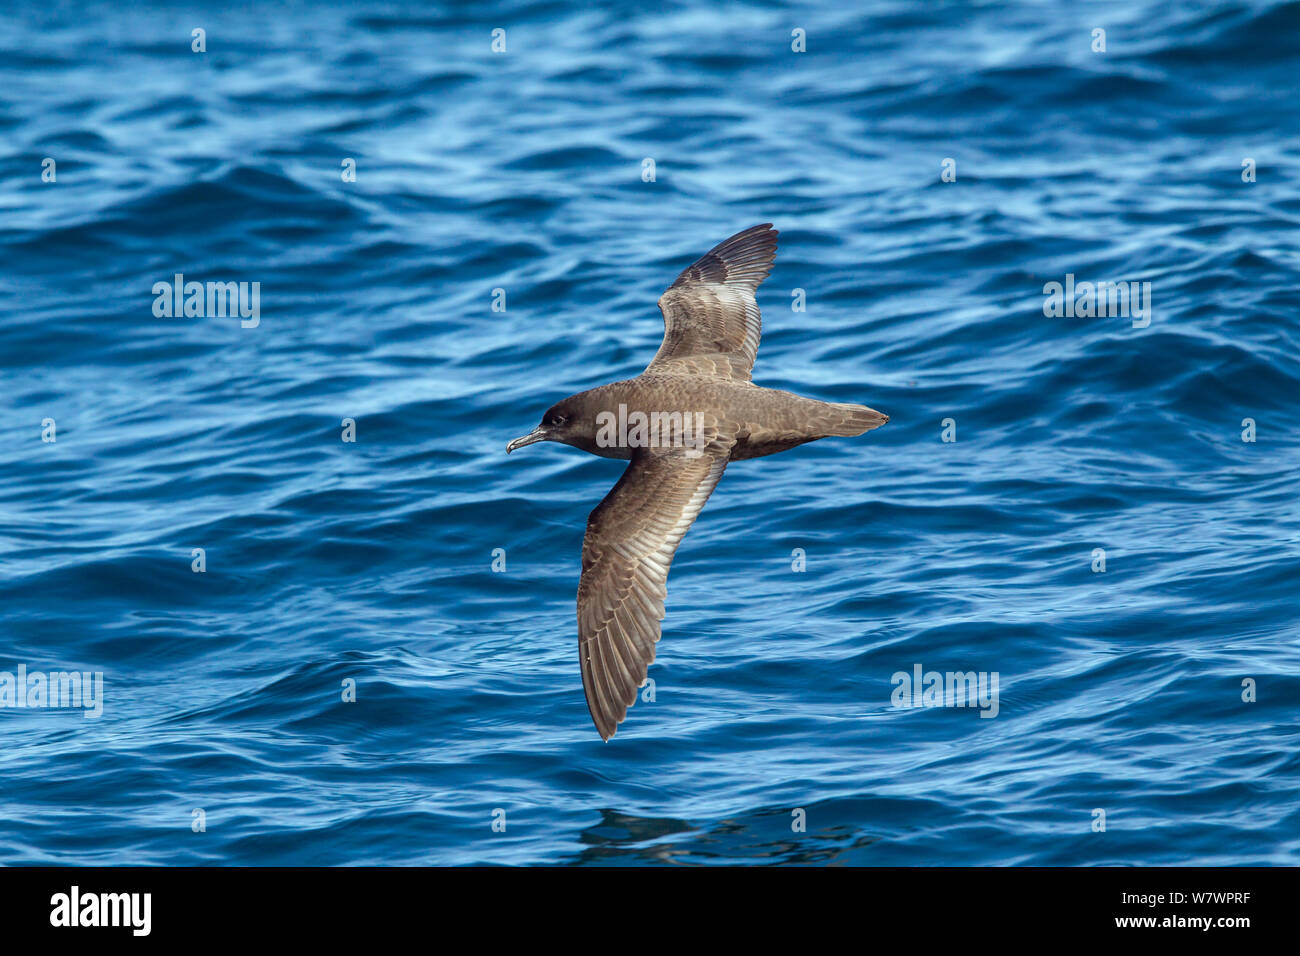 Fresh plumaged Sooty shearwater (Puffinus griseus) in flight low over the water showing the upperwing. Kaikoura, Canterbury, New Zealand, November. Stock Photo